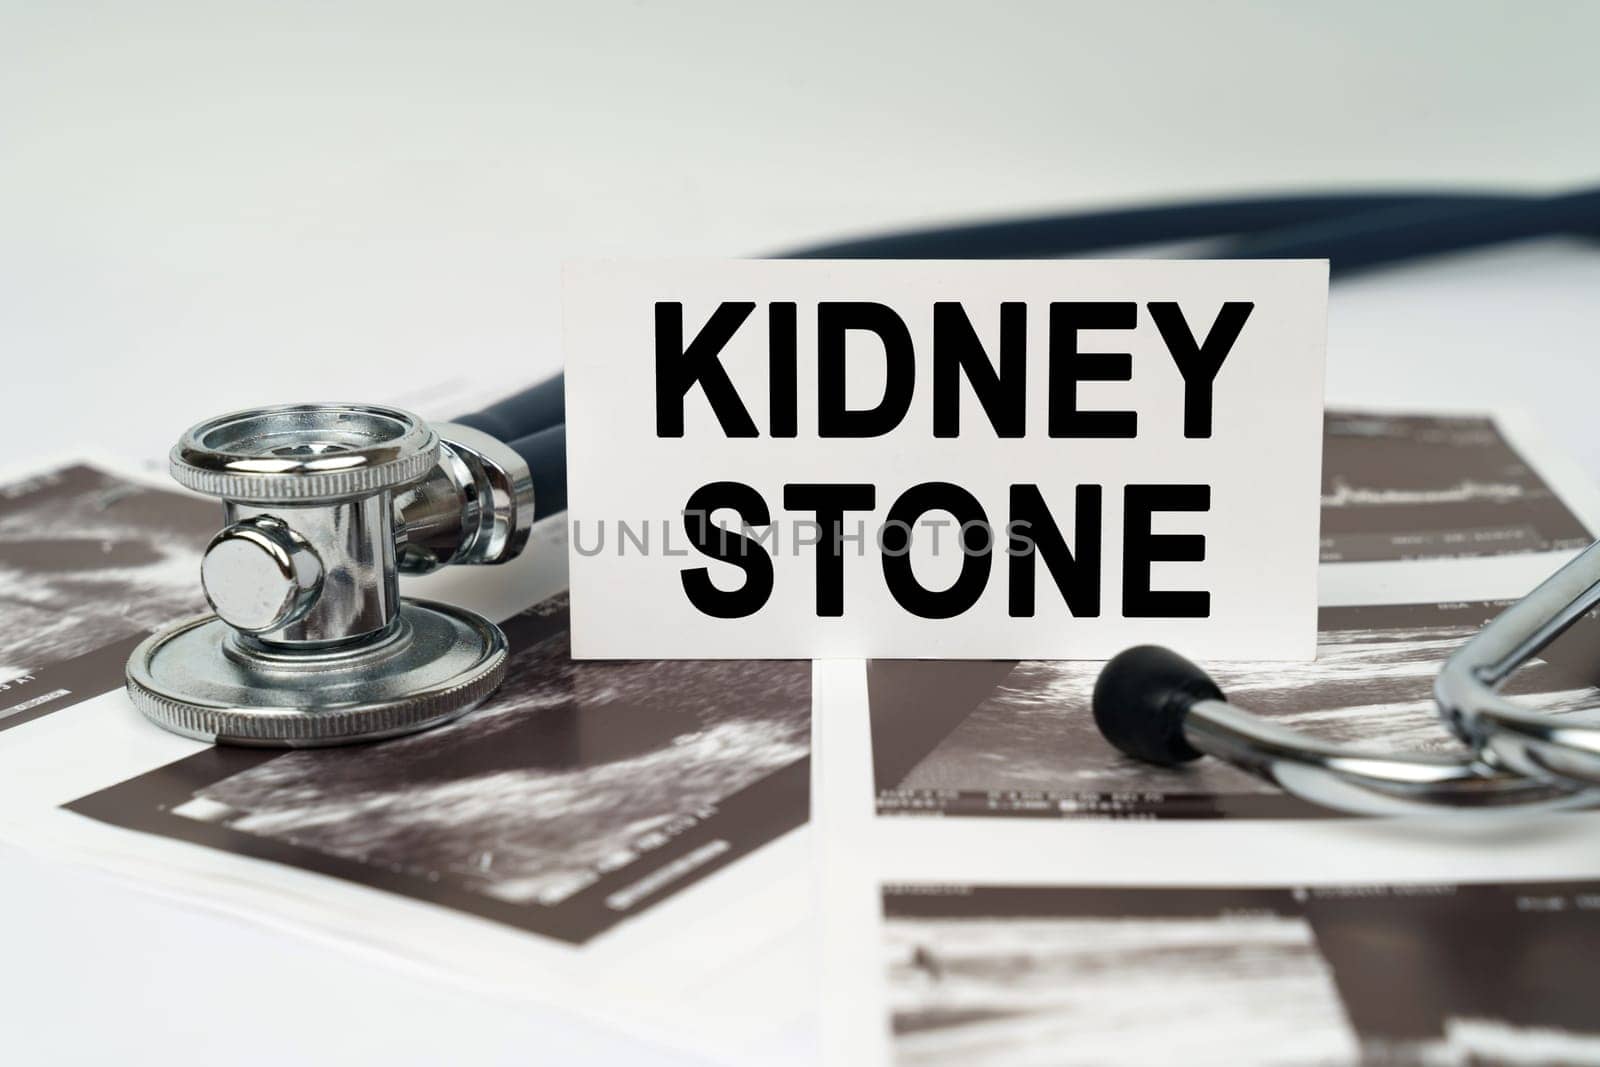 On the ultrasound pictures there is a stethoscope and a business card with the inscription - Kidney stone by Sd28DimoN_1976